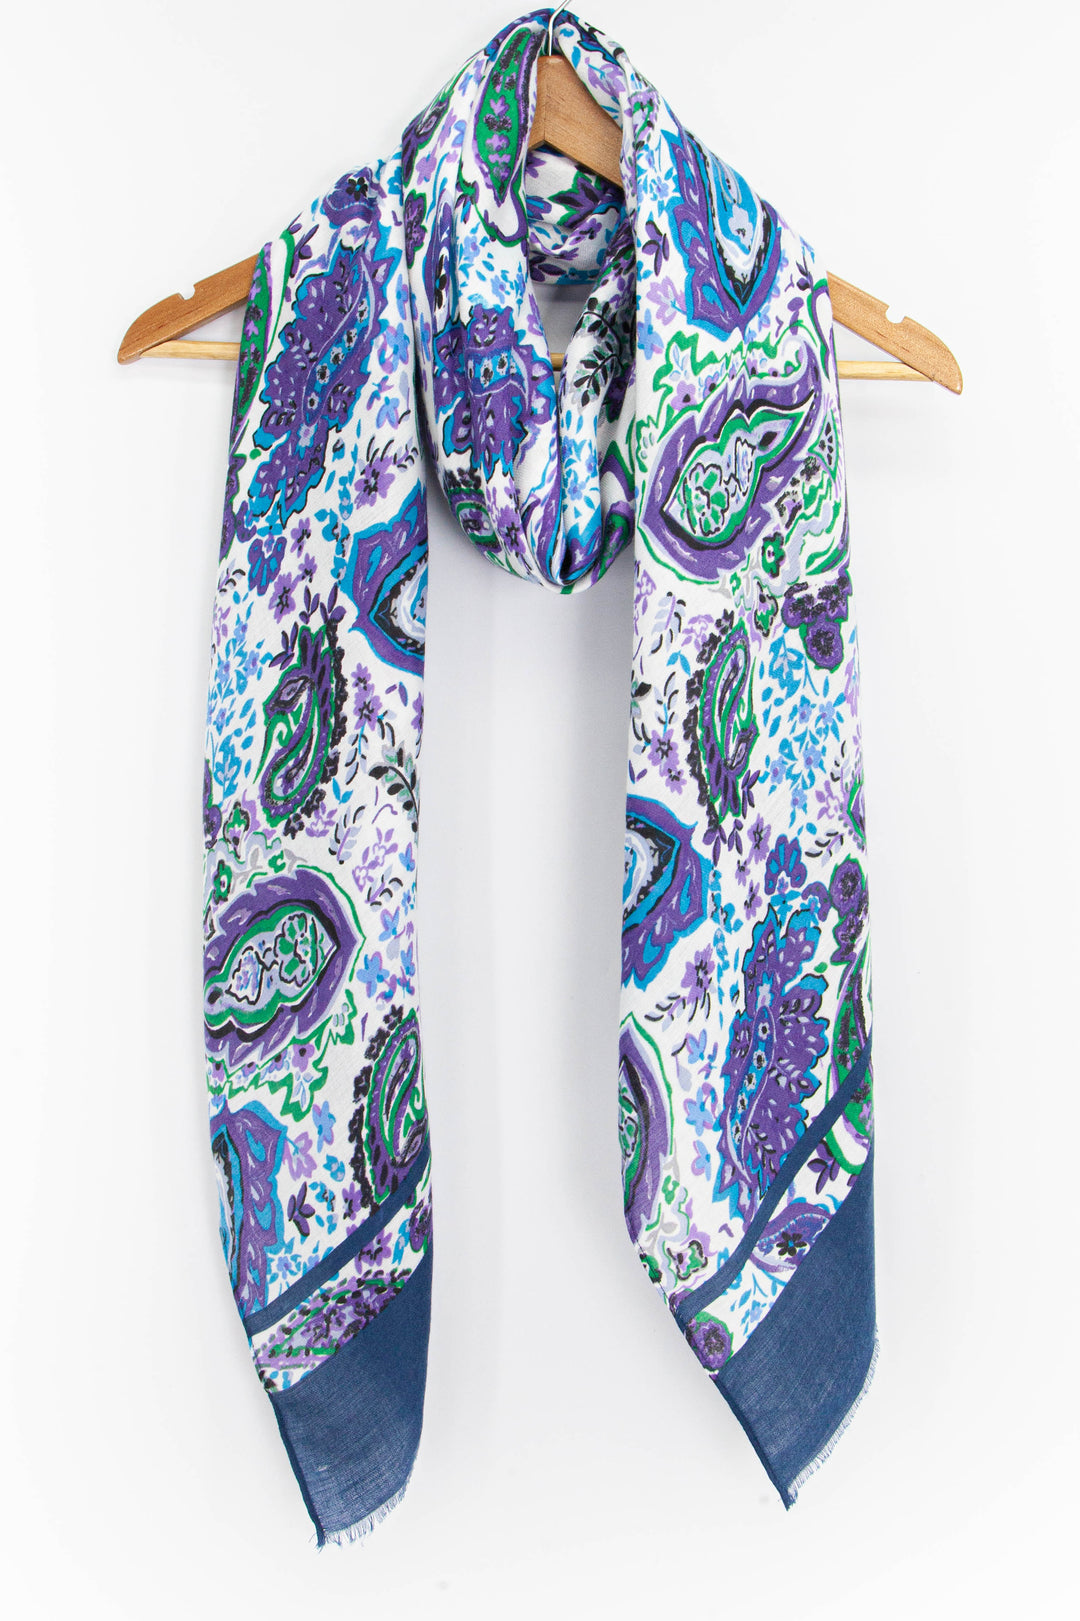 blue paisley print scarf draped around a coat hanger showing the blue, purple and green pattern